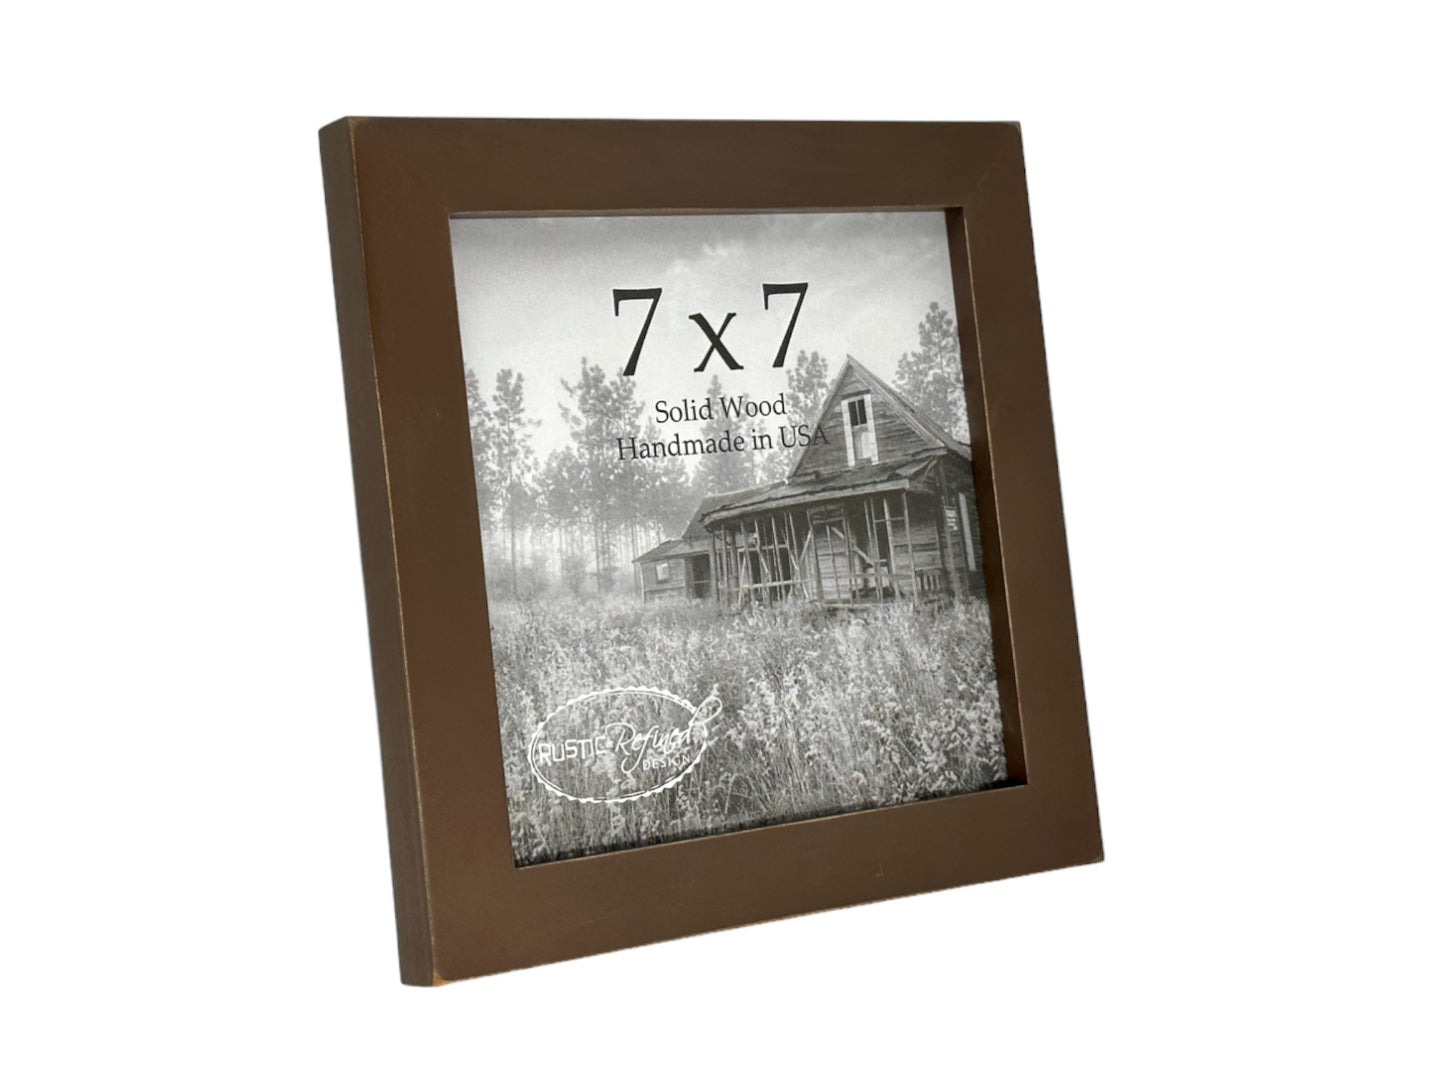 7x7 Rustic Gallery Collection - Picture Frames